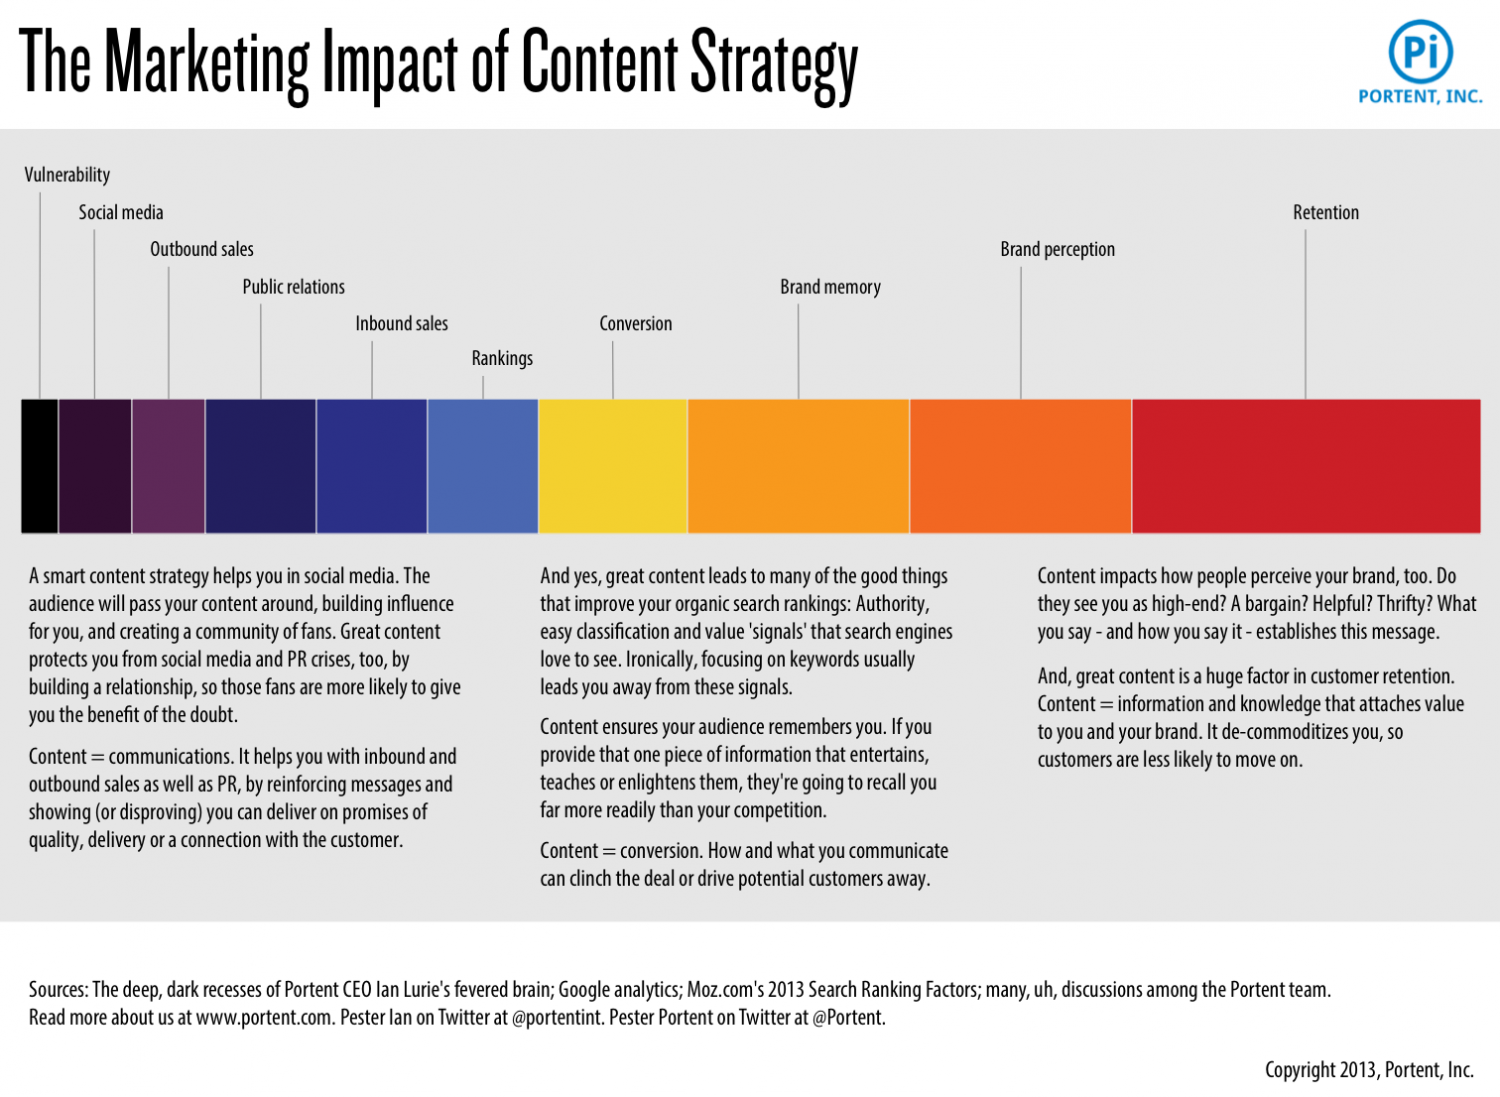 The Marketing Impact of Content Strategy Infographic